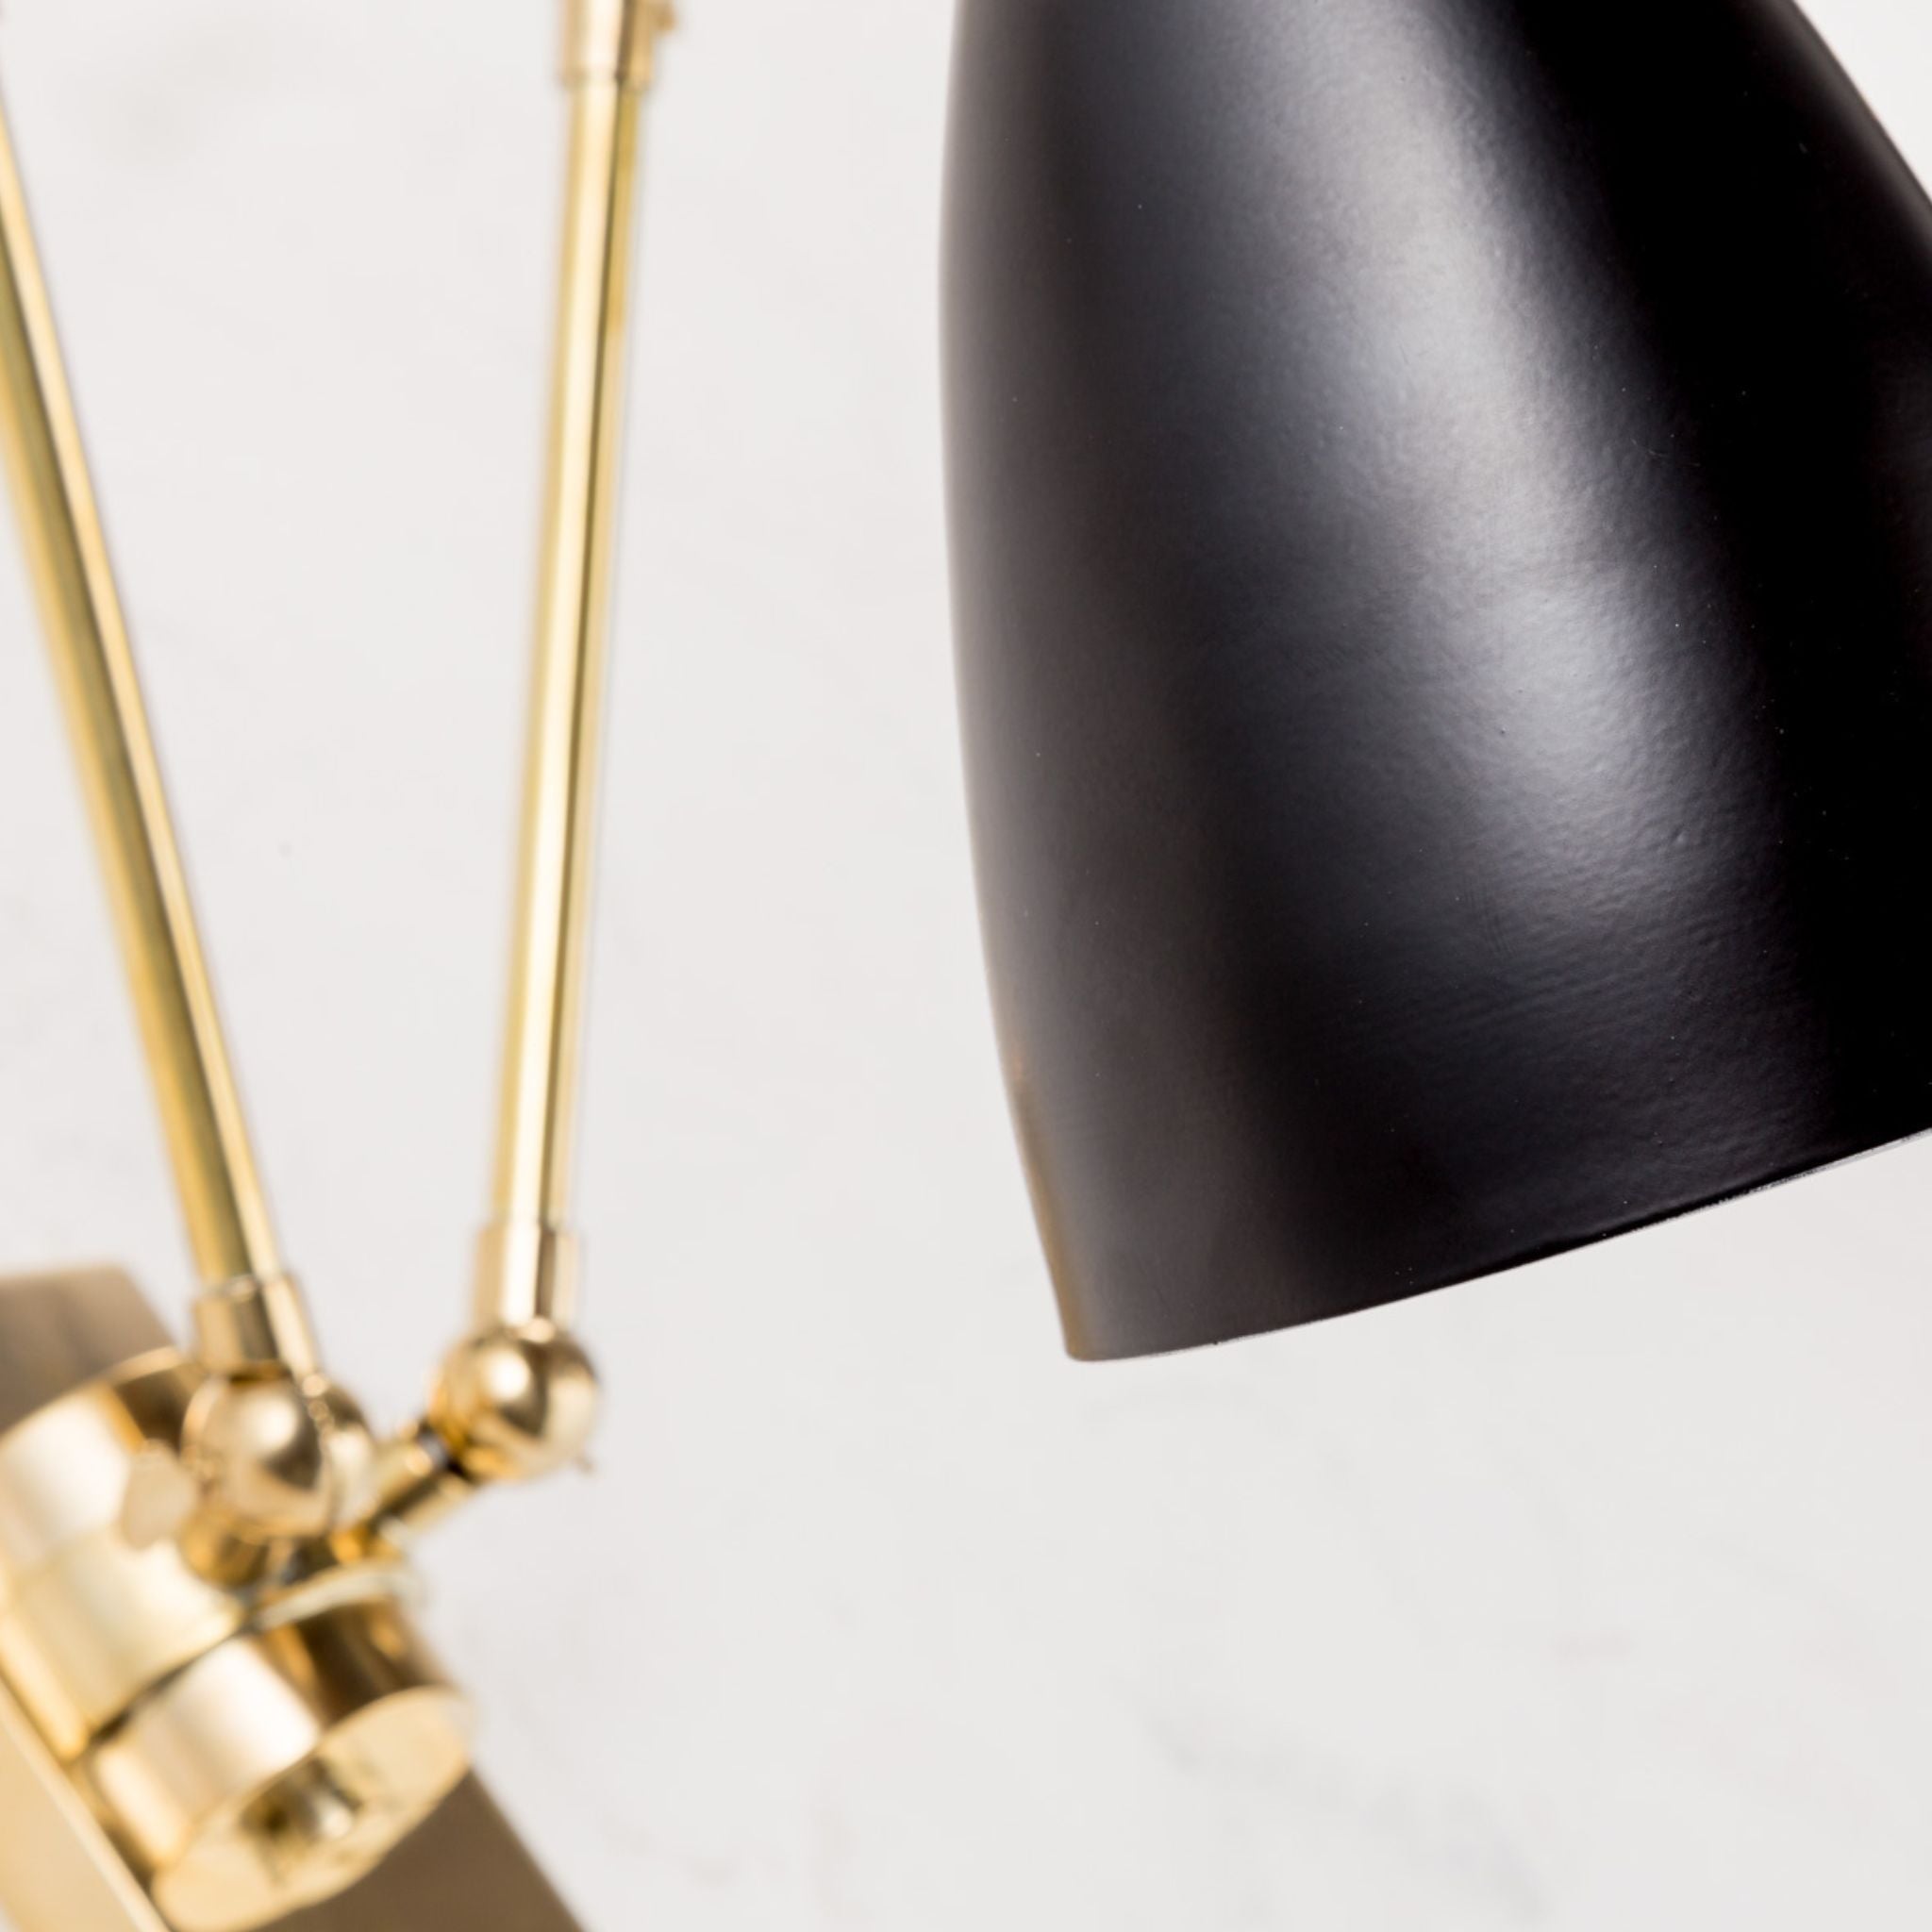 Wormhole jet black double joint arm brass wall light - ilbronzetto